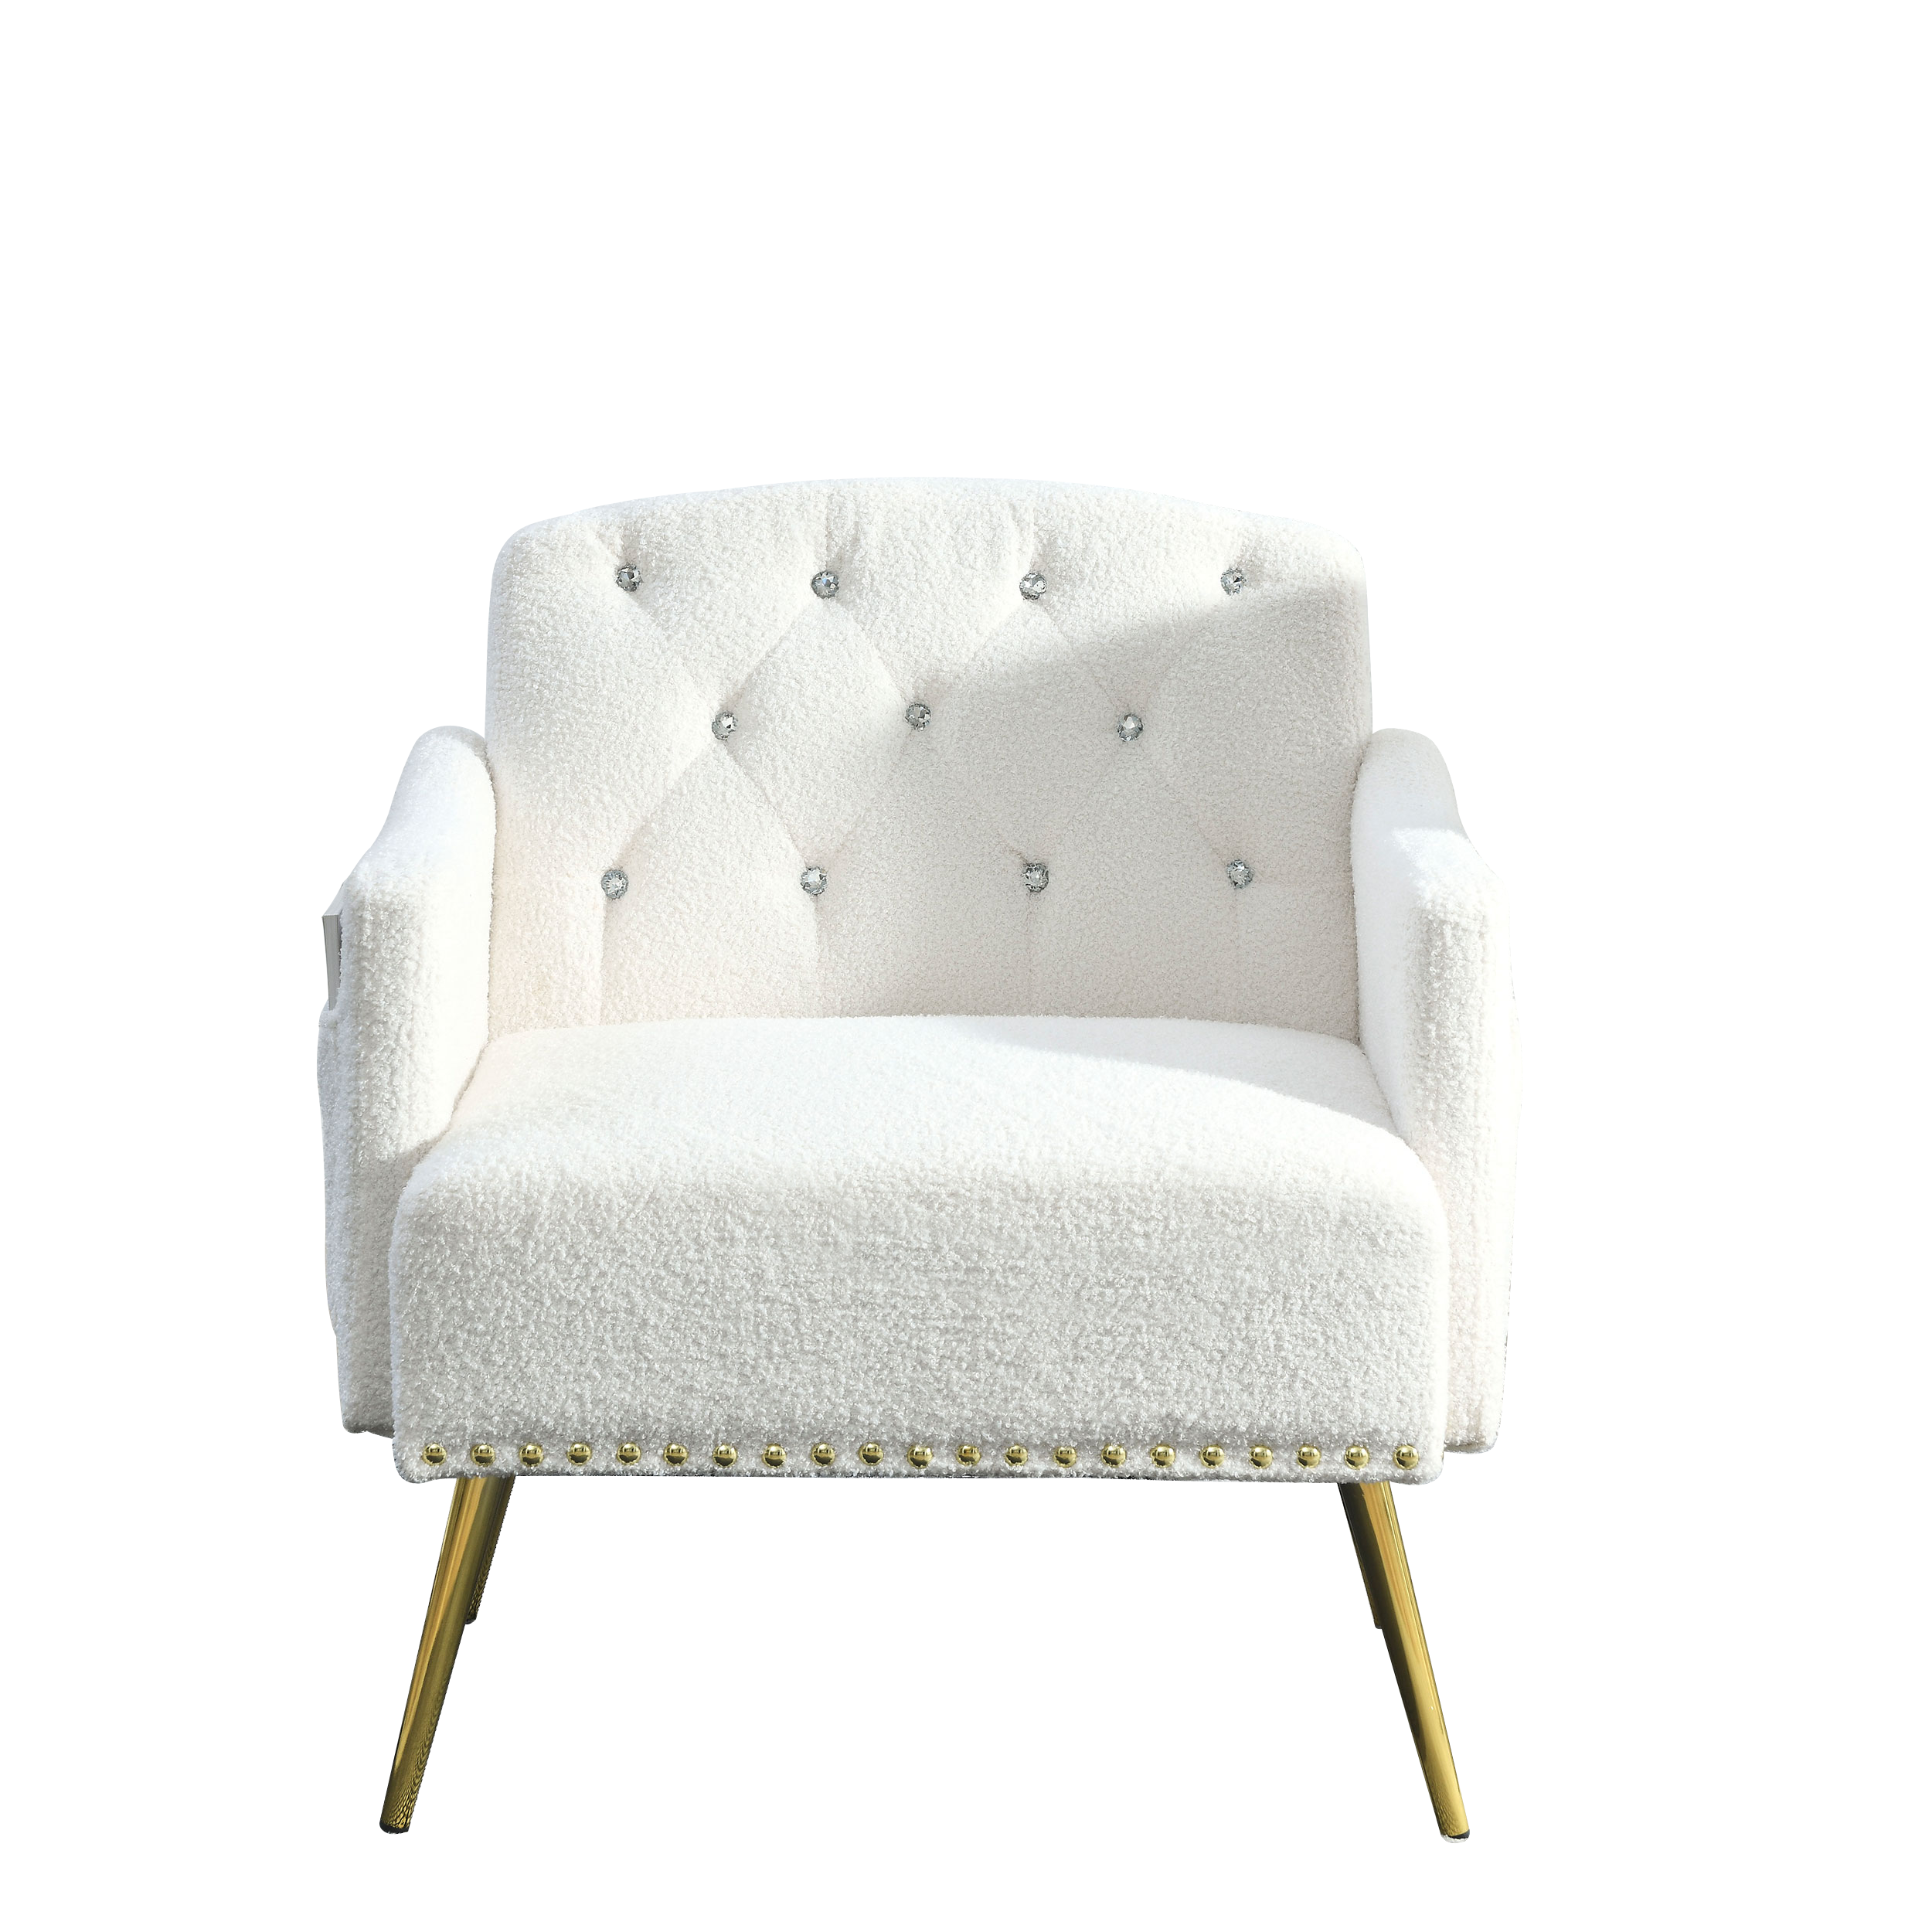 30 "W Modern Chesterfield Tufted Upholstered Chair with Deep Buttons - White Teddy